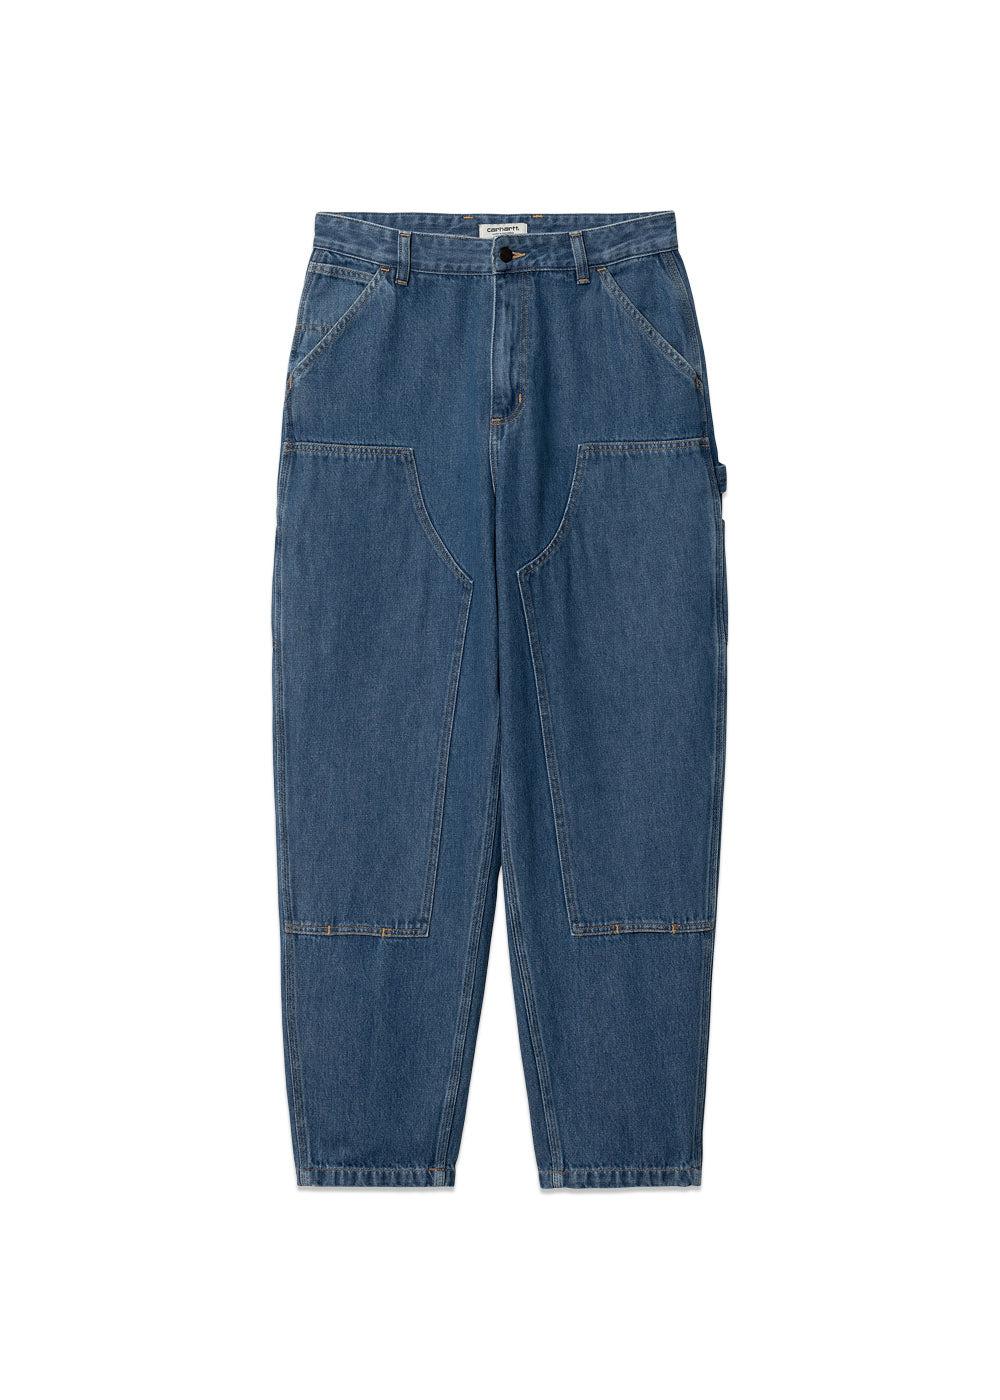 W Curron DK Pant - Blue Stone Washed